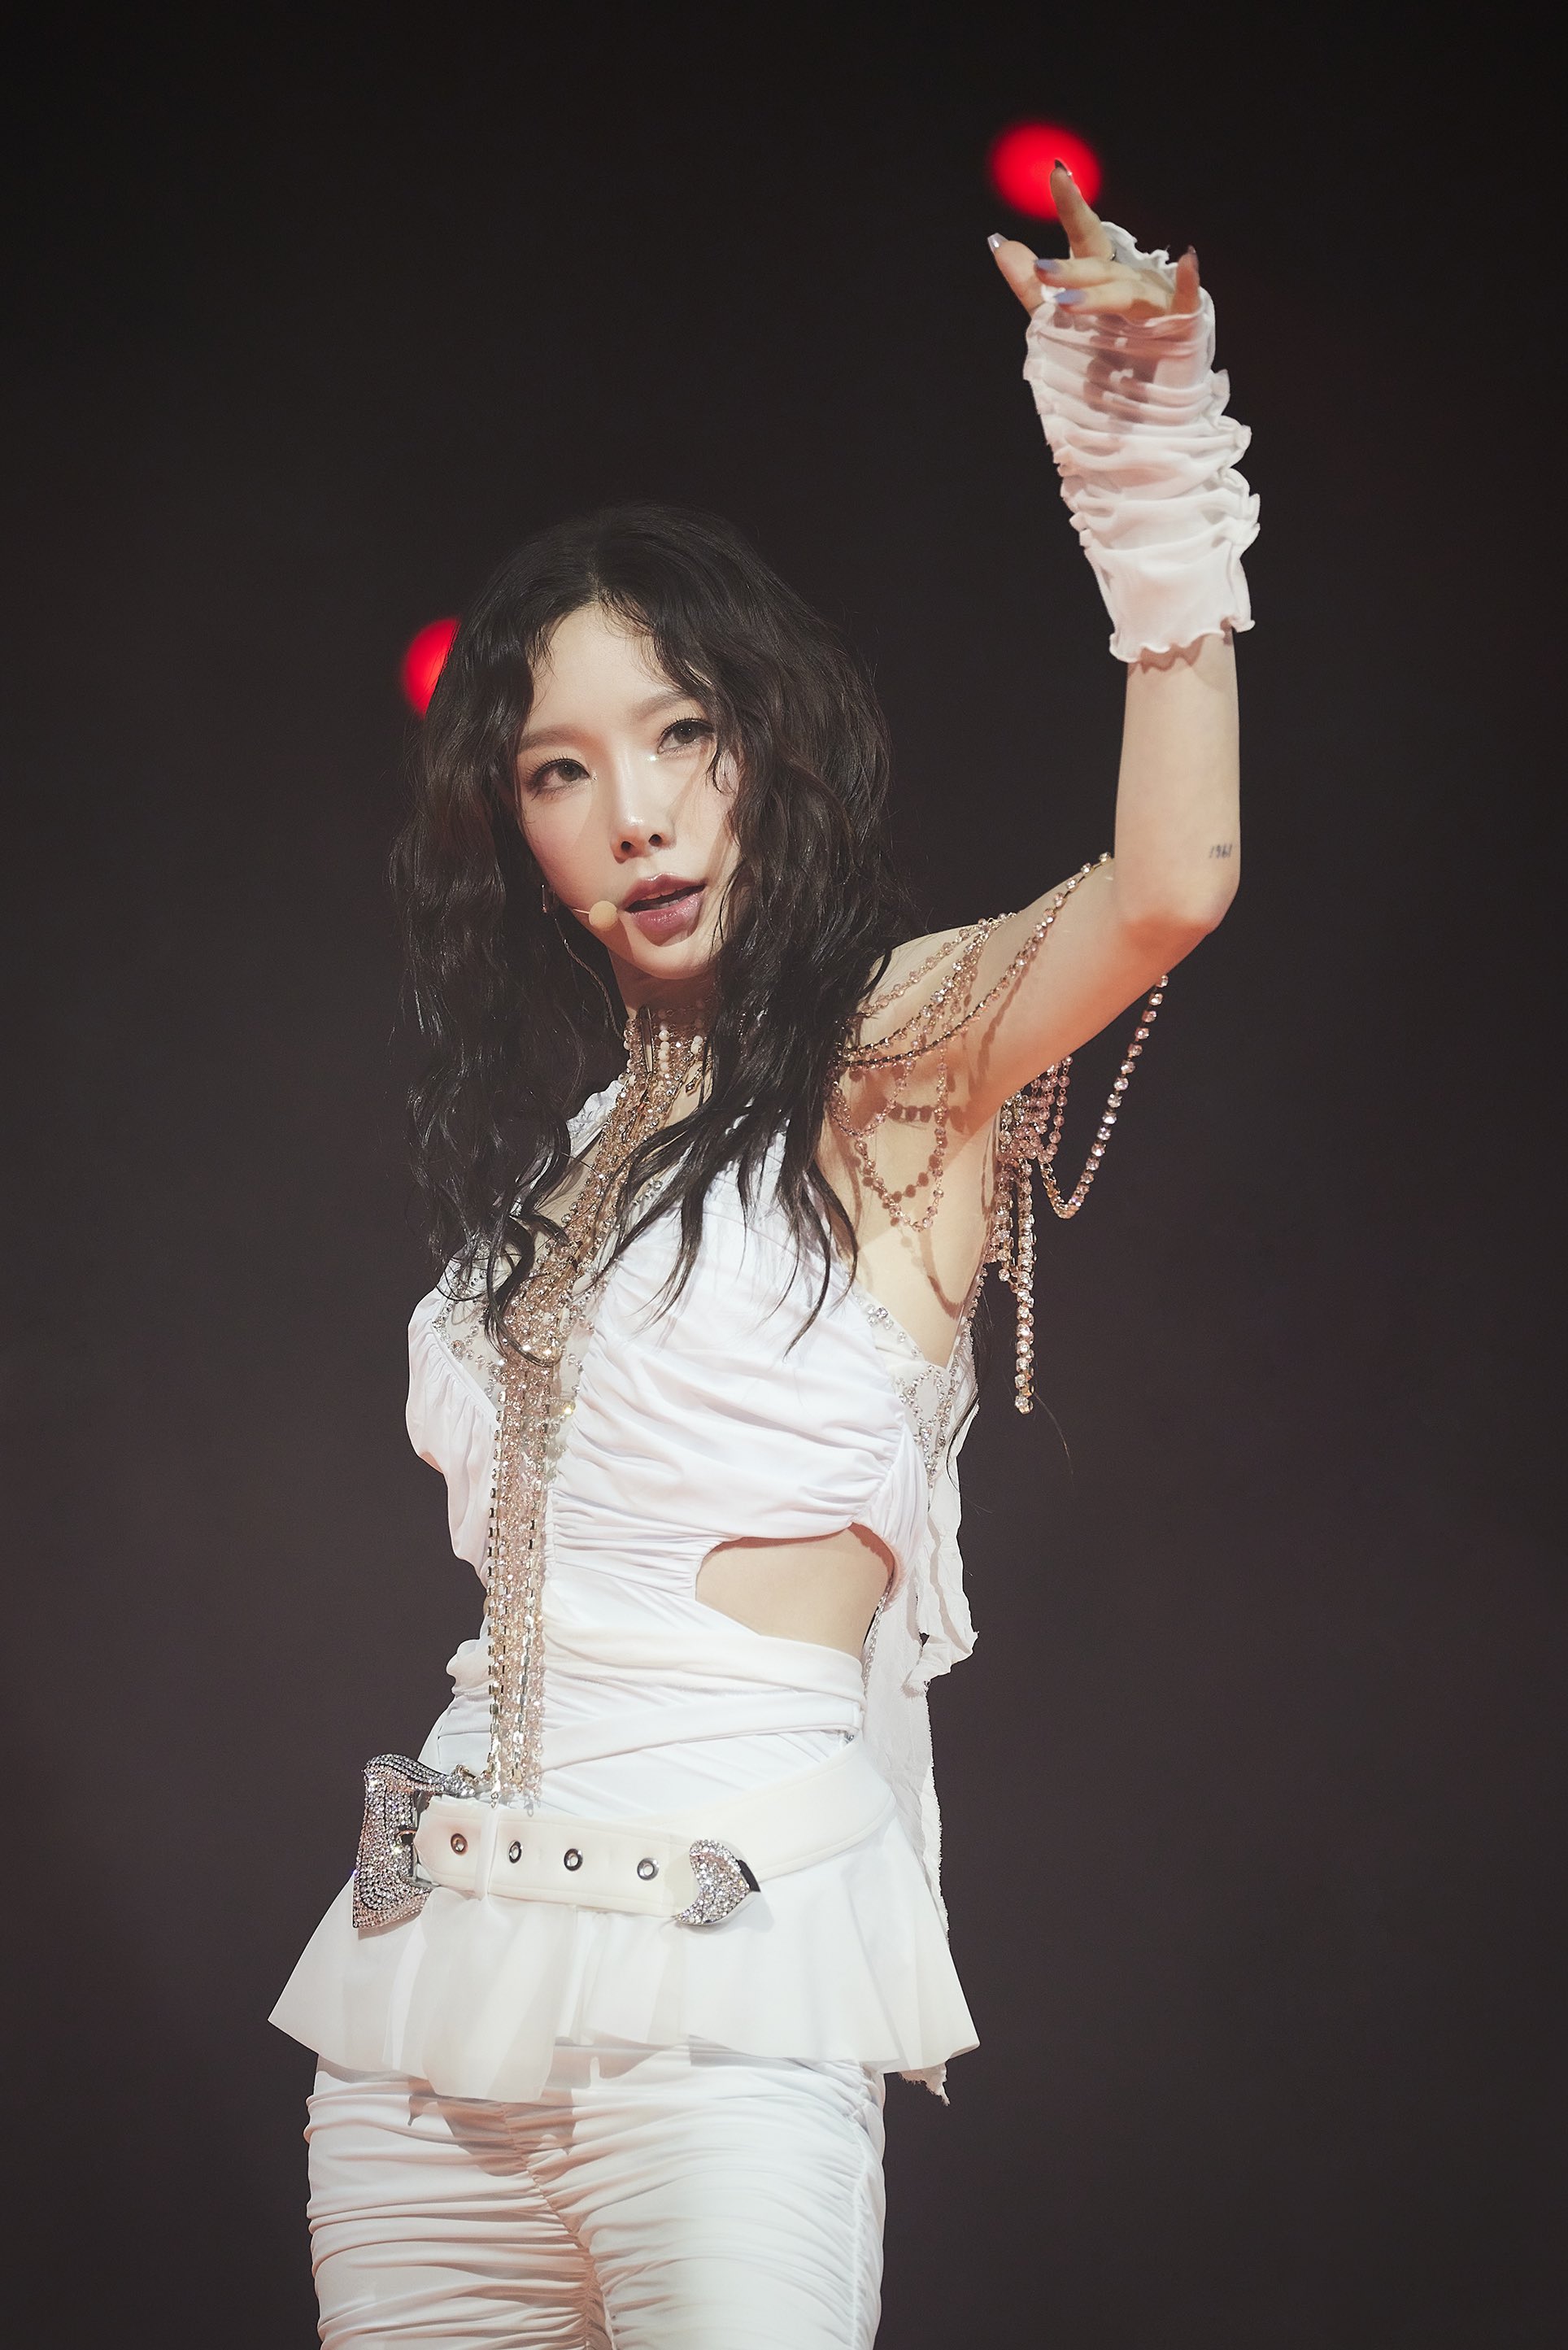 foreverlovetaeyeon on X: As Taeyeon officially becomes an